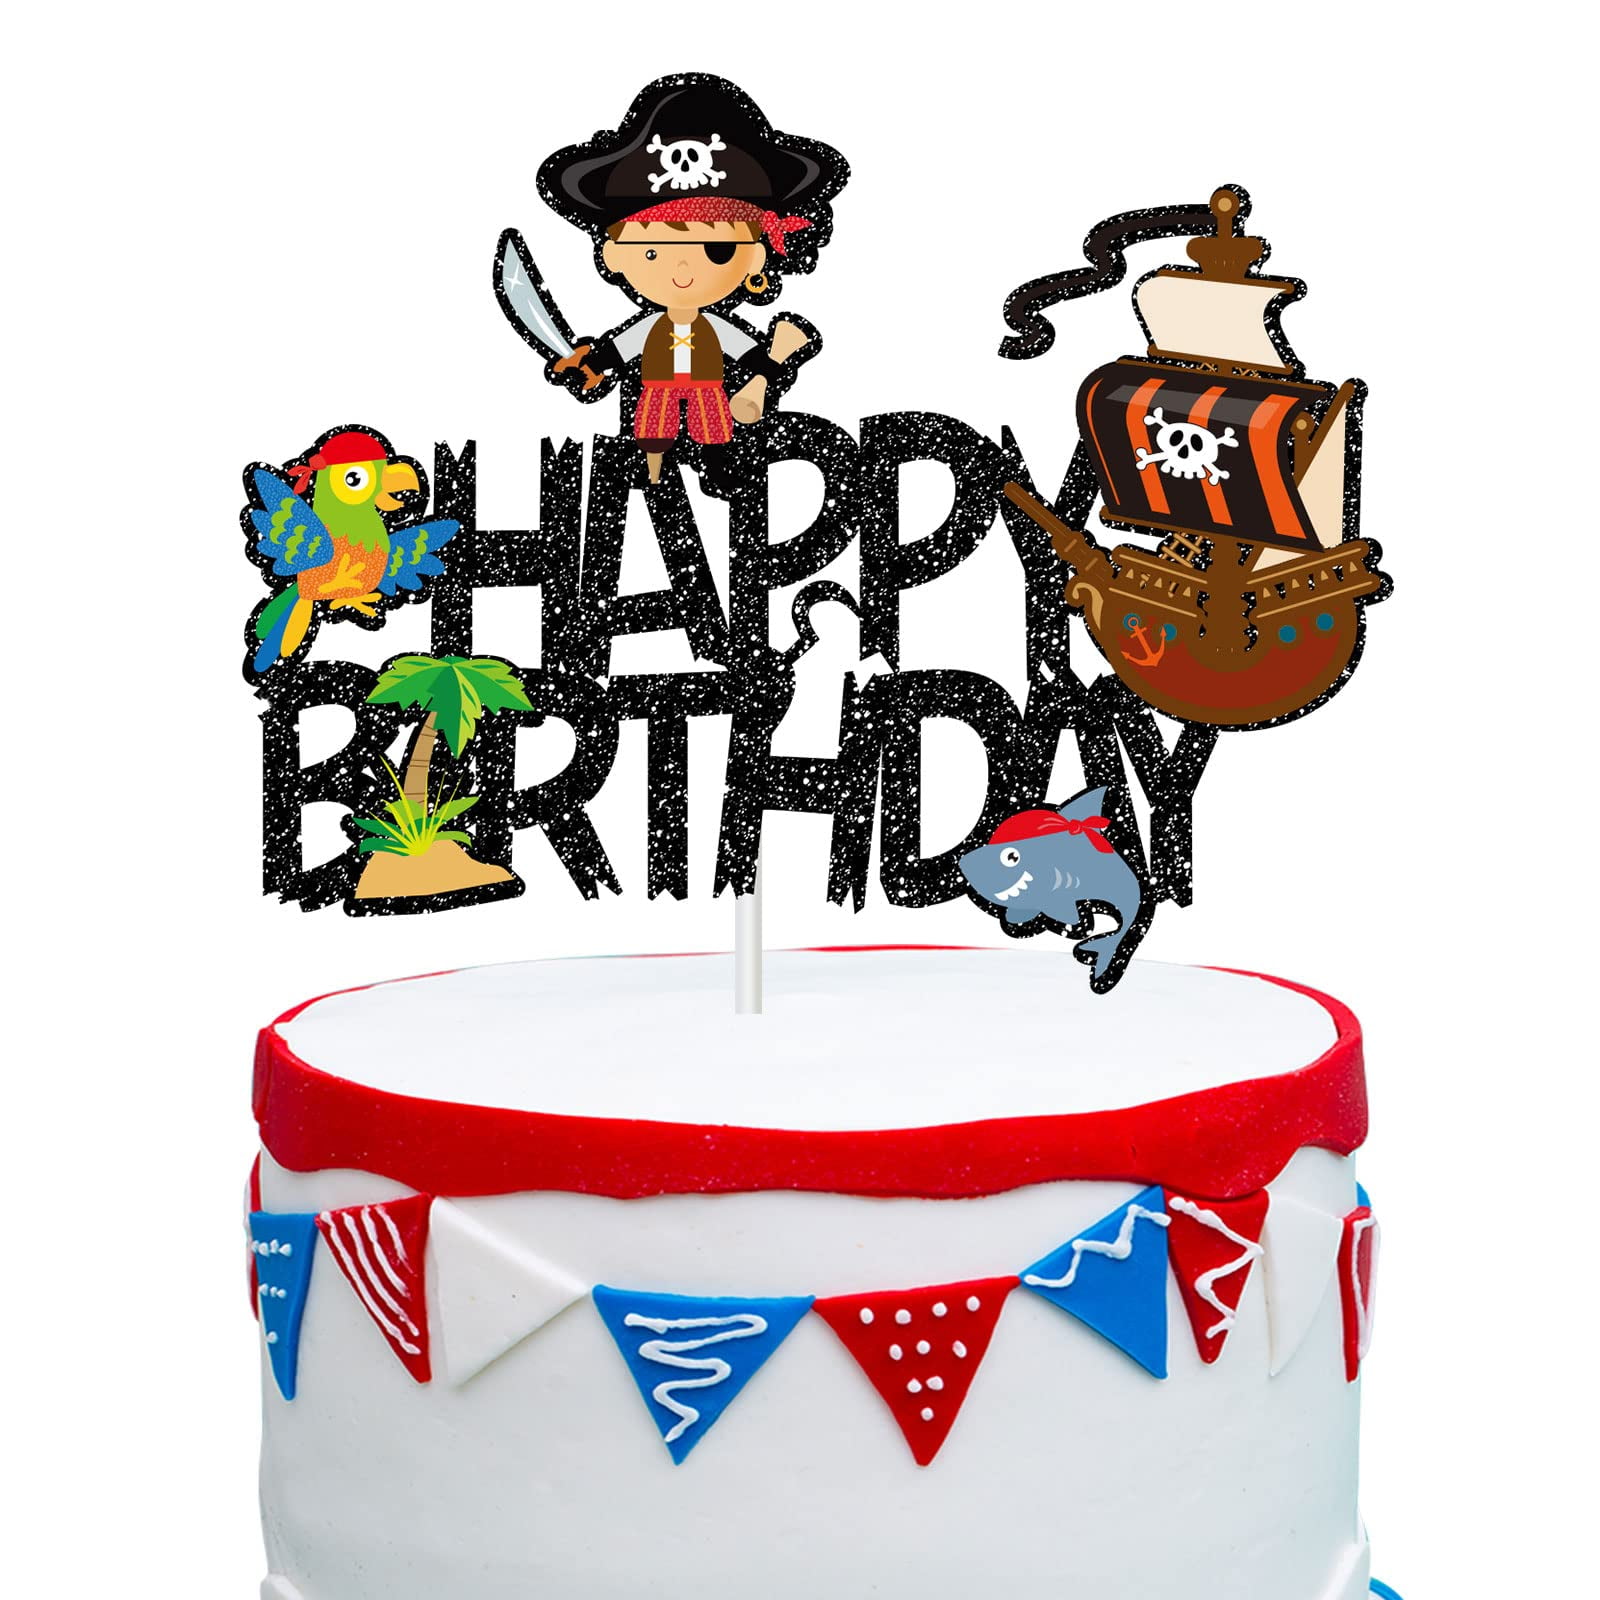 HOW TO MAKE A PIRATE SHIP CAKE DIY KIDS BIRTHDAY PARTY IDEAS - YouTube